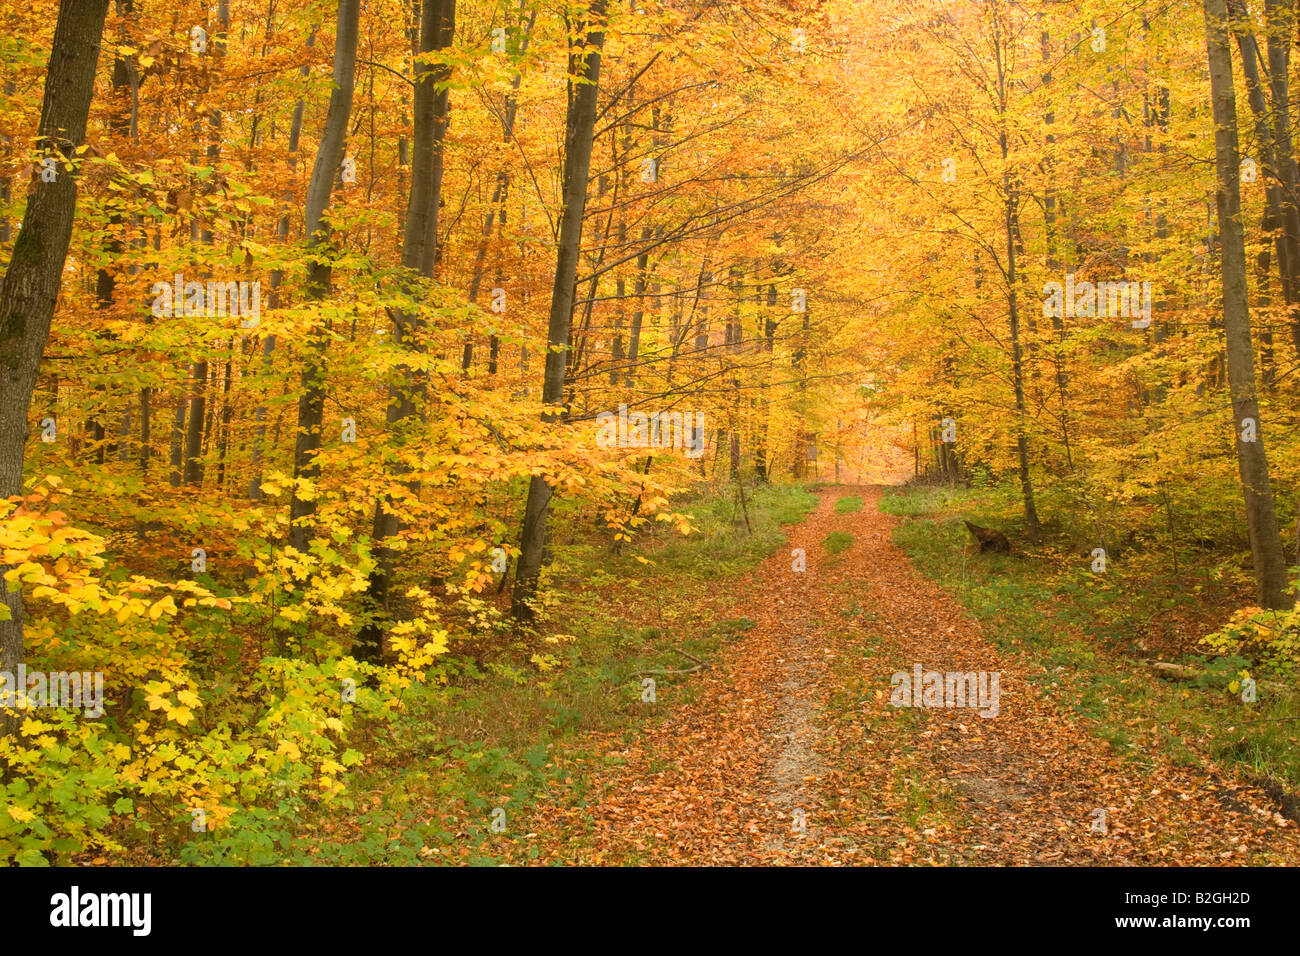 forest road autumn autumnal colors swabian alp germany Stock Photo